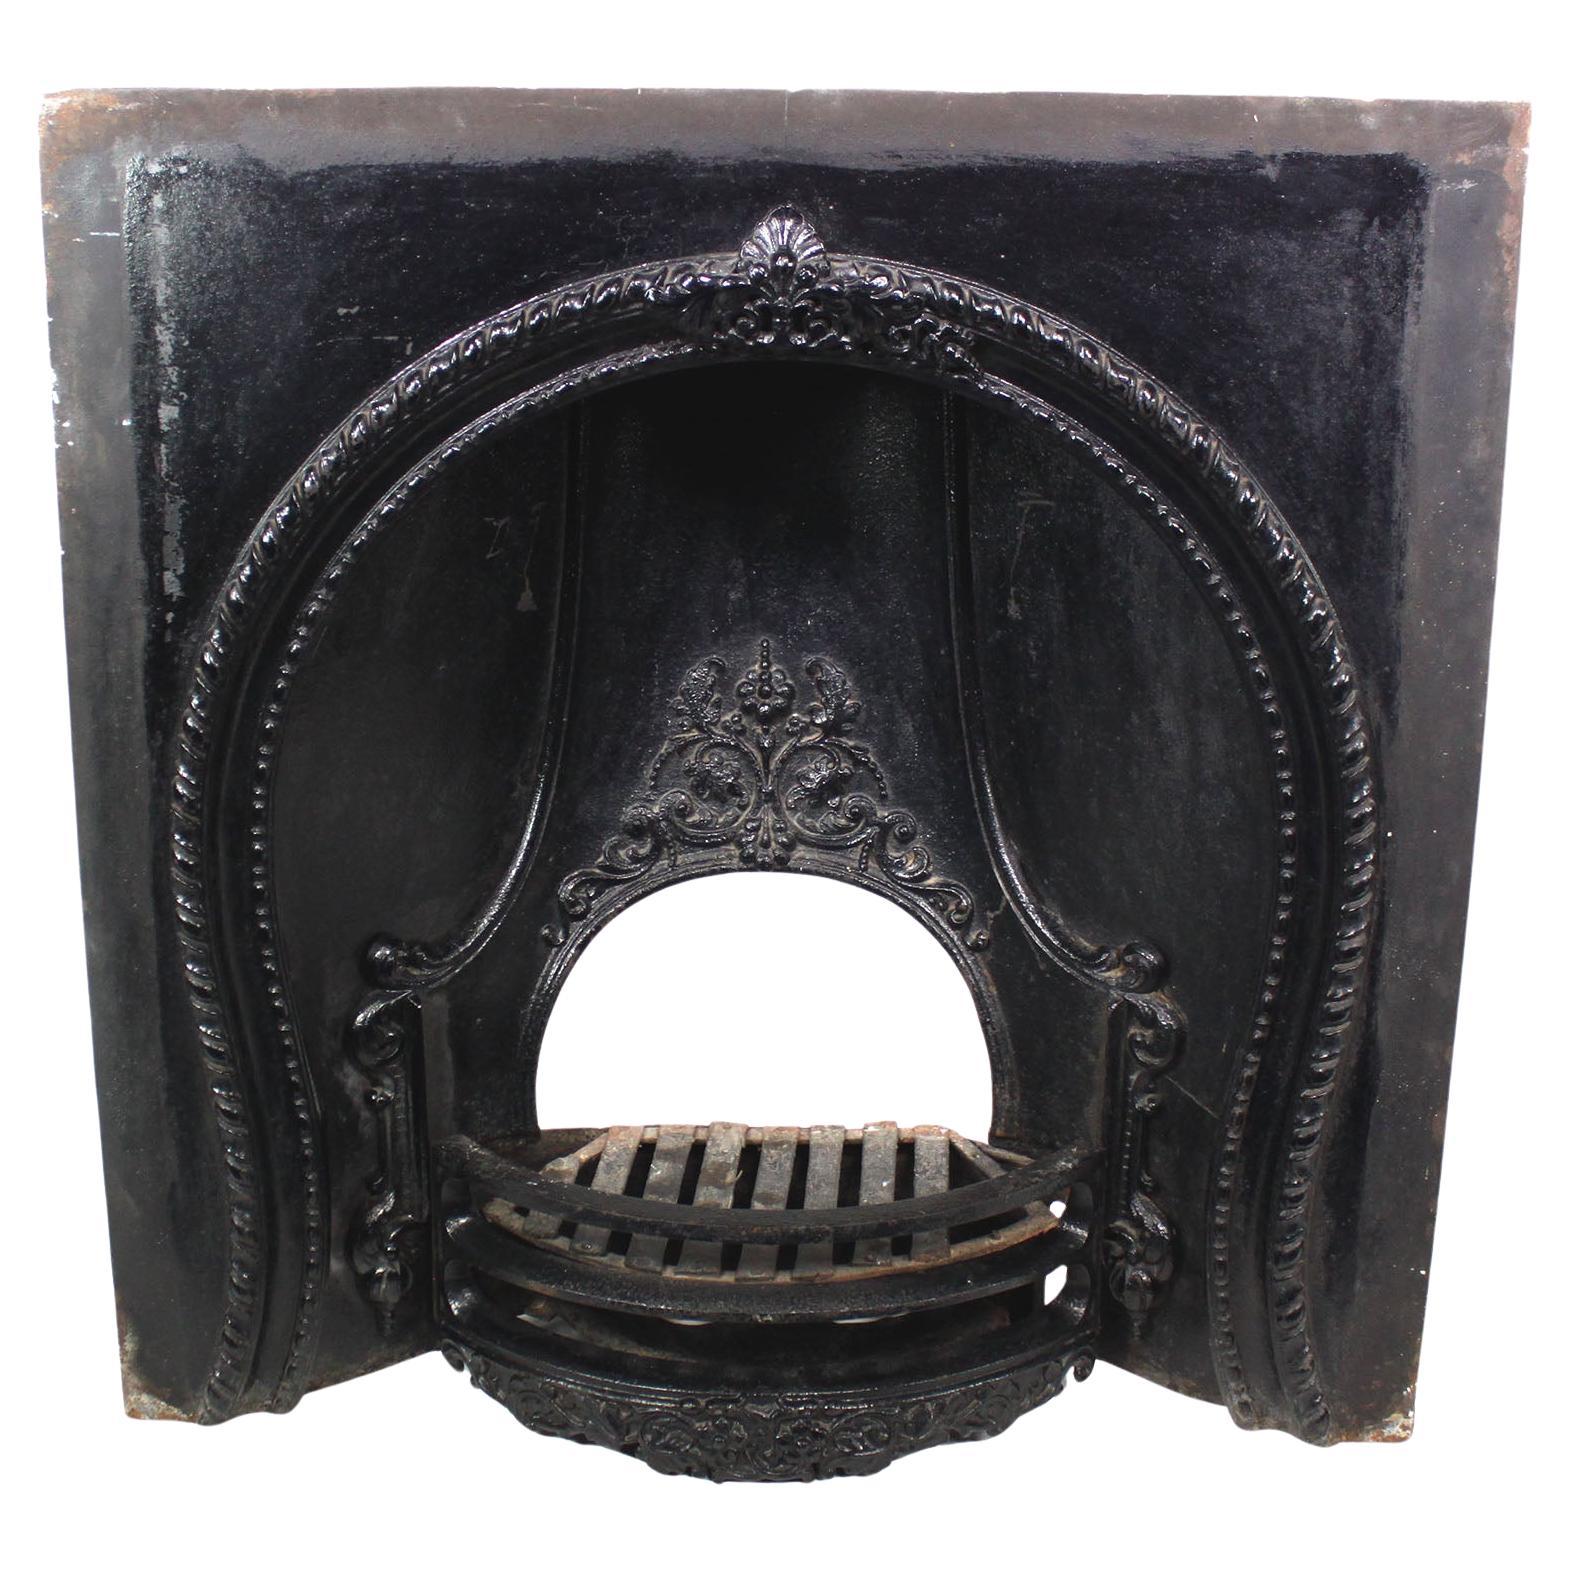 A French 19th Century Cast Iron Fireplace Mantel Wood/Coal Register Insert Grate For Sale